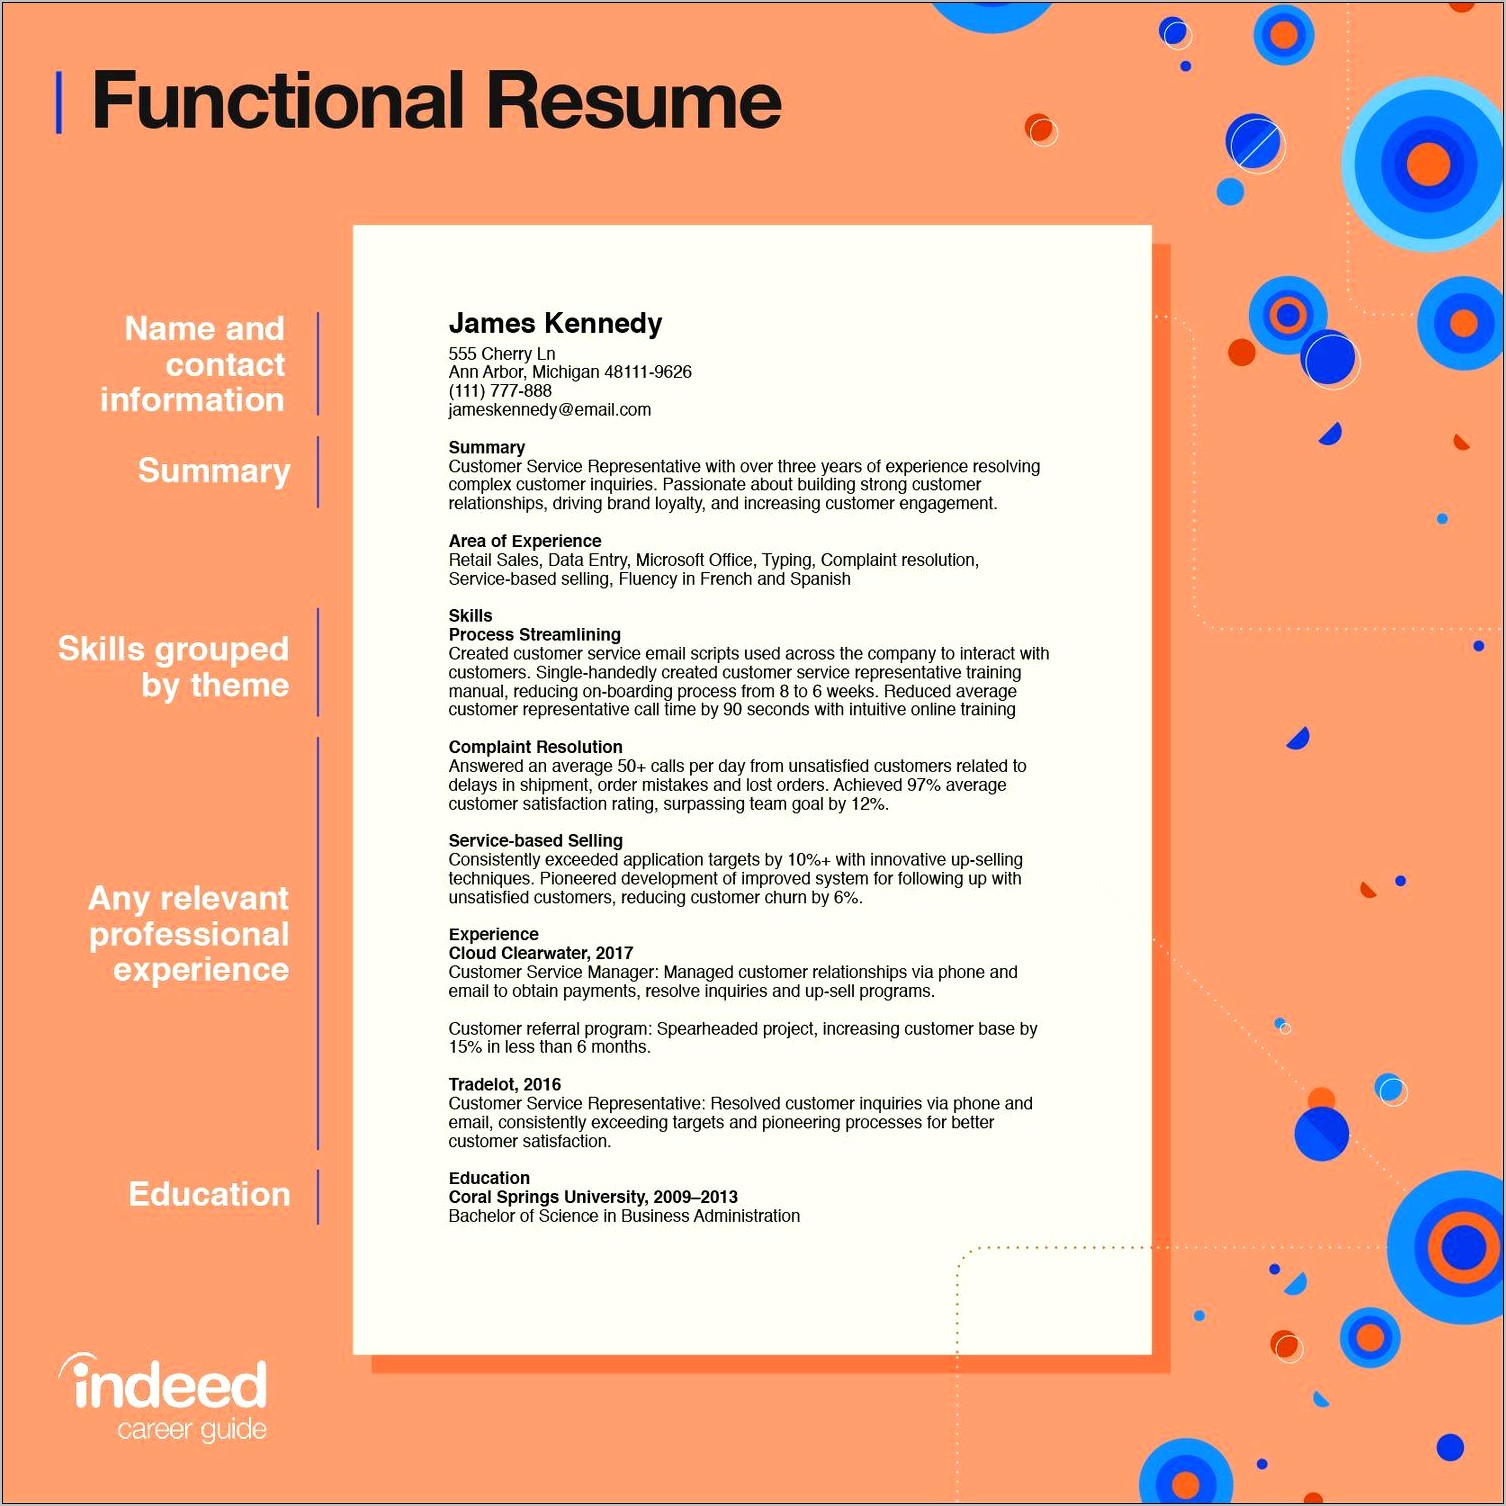 Resume Interests And Skills Examples